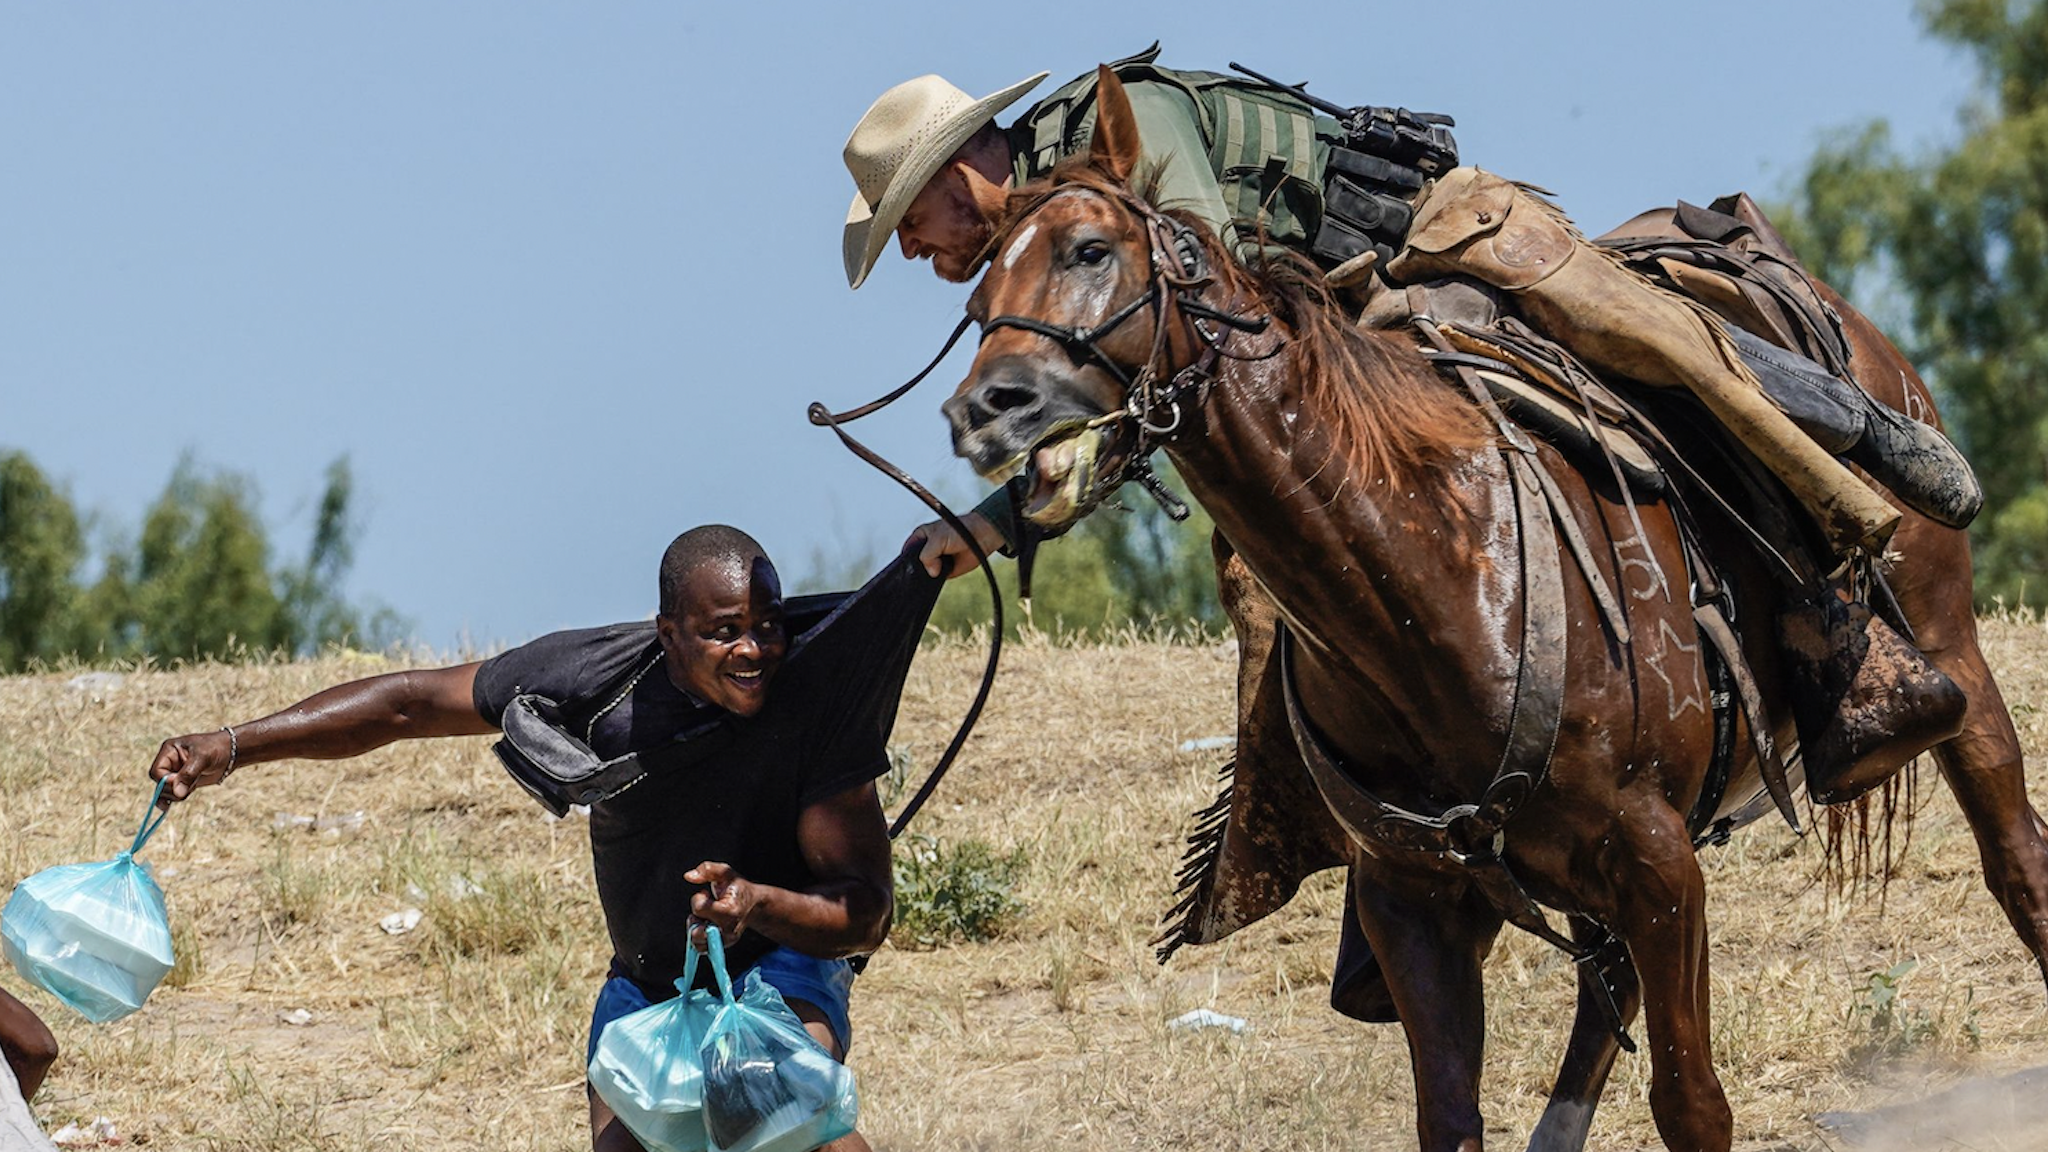 TOPSHOT - A United States Border Patrol agent on horseback tries to stop a Haitian migrant from entering an encampment on the banks of the Rio Grande near the Acuna Del Rio International Bridge in Del Rio, Texas on September 19, 2021.